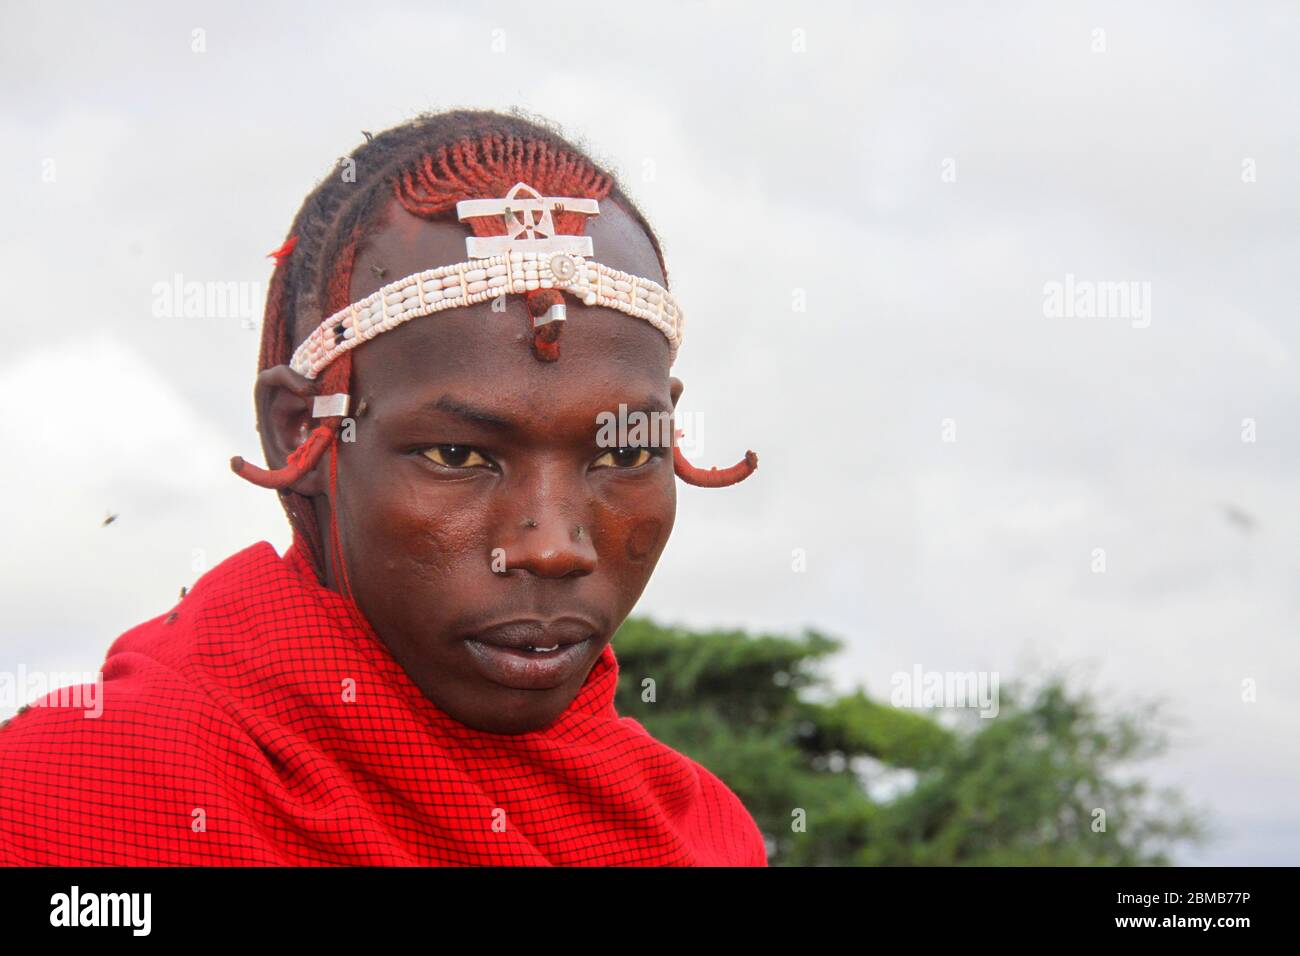 Portrait of a young Maasai tribesman. Maasai is an ethnic group of semi-nomadic people. Photographed in Tanzania Stock Photo